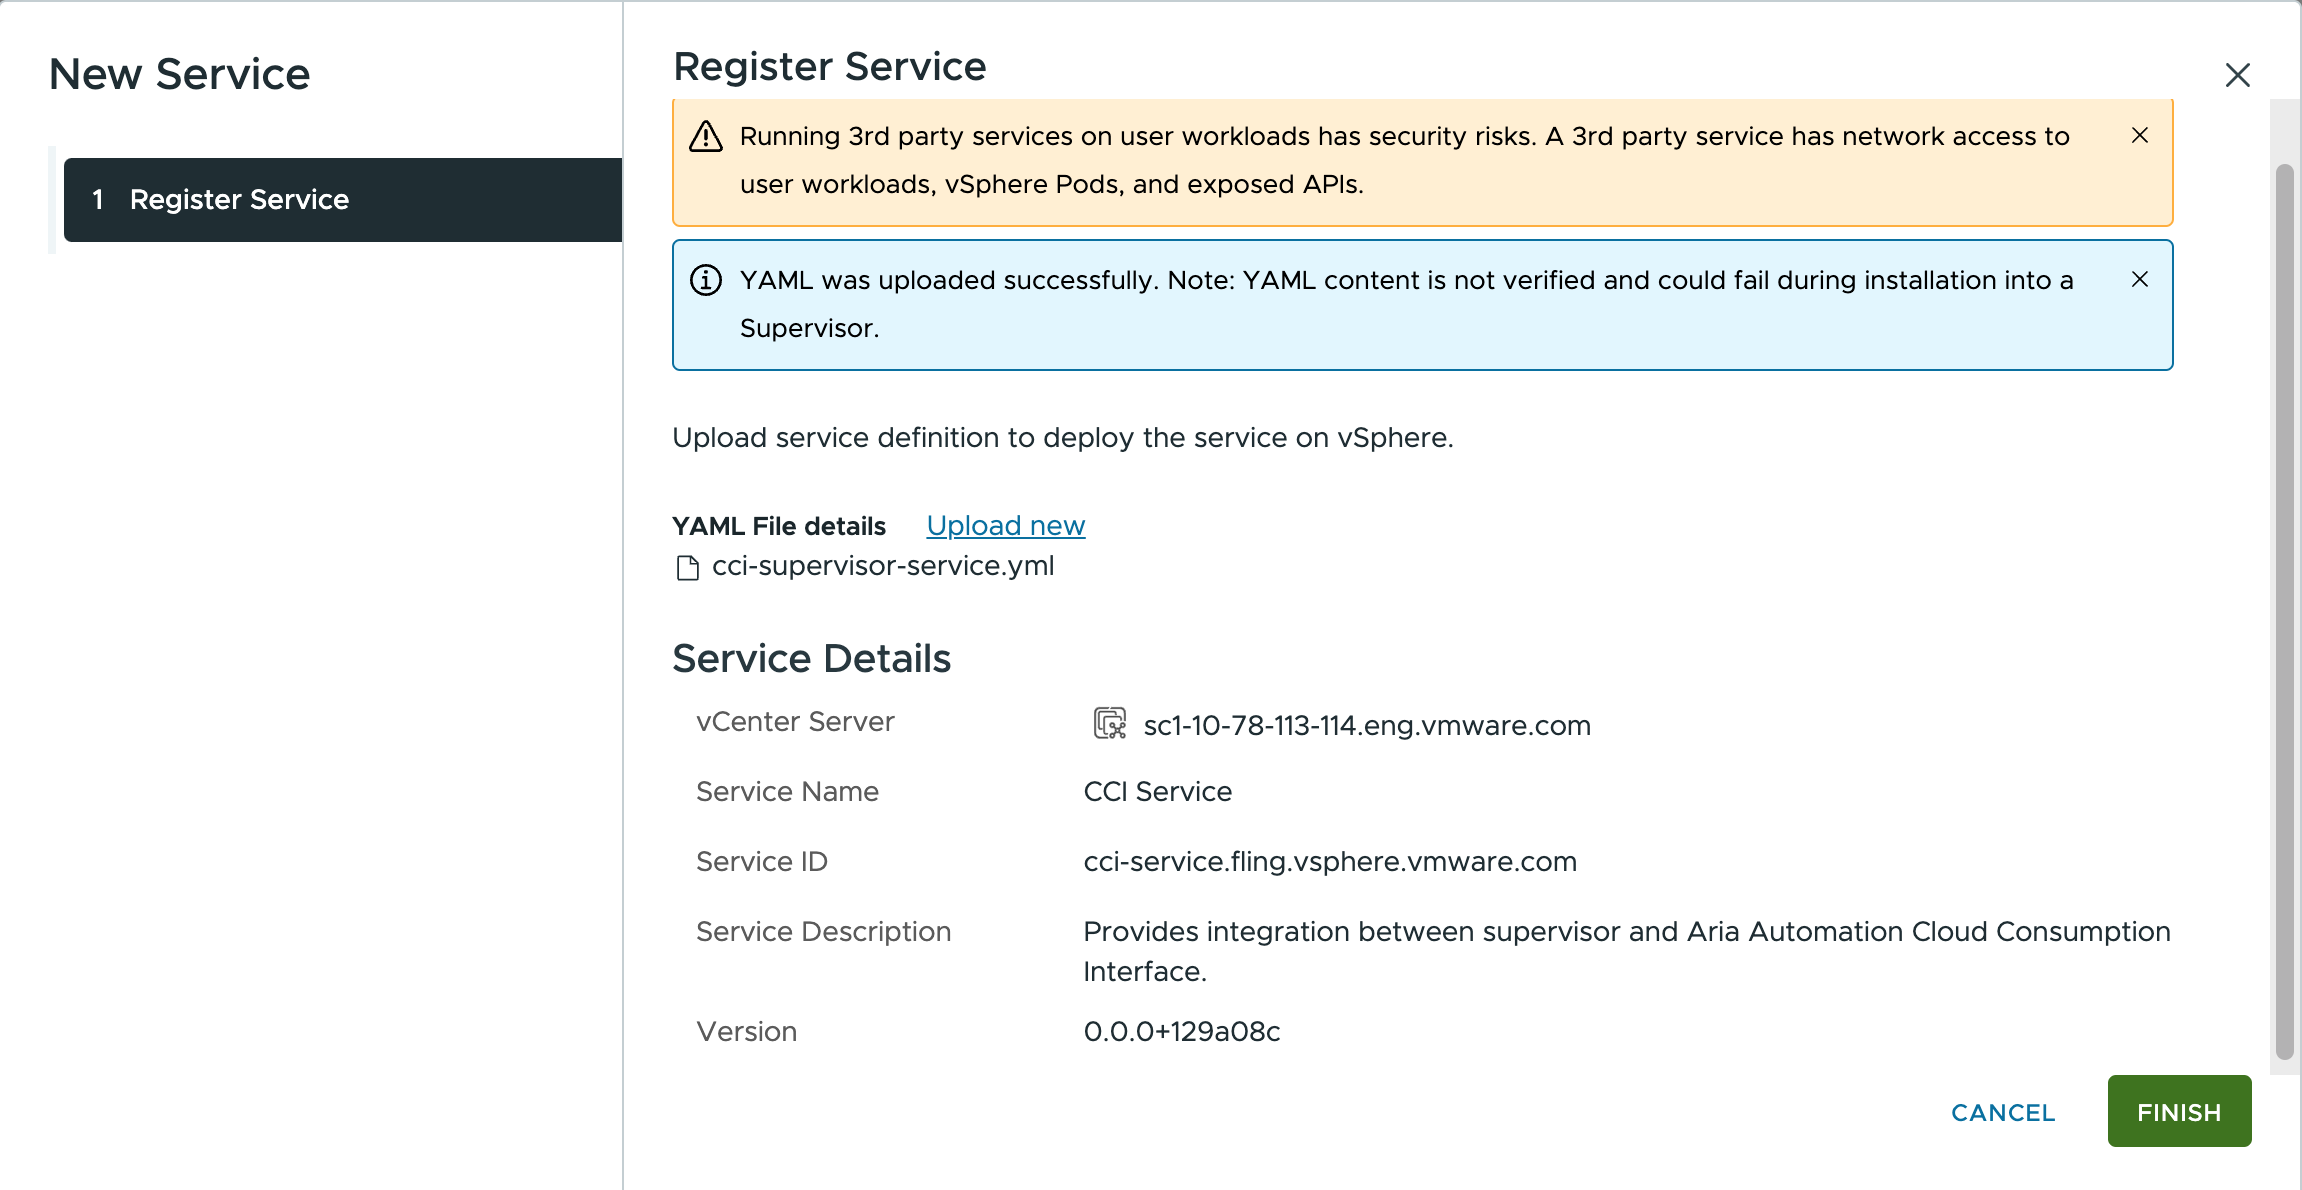 Verify Service Details and finish registering the CCI Service